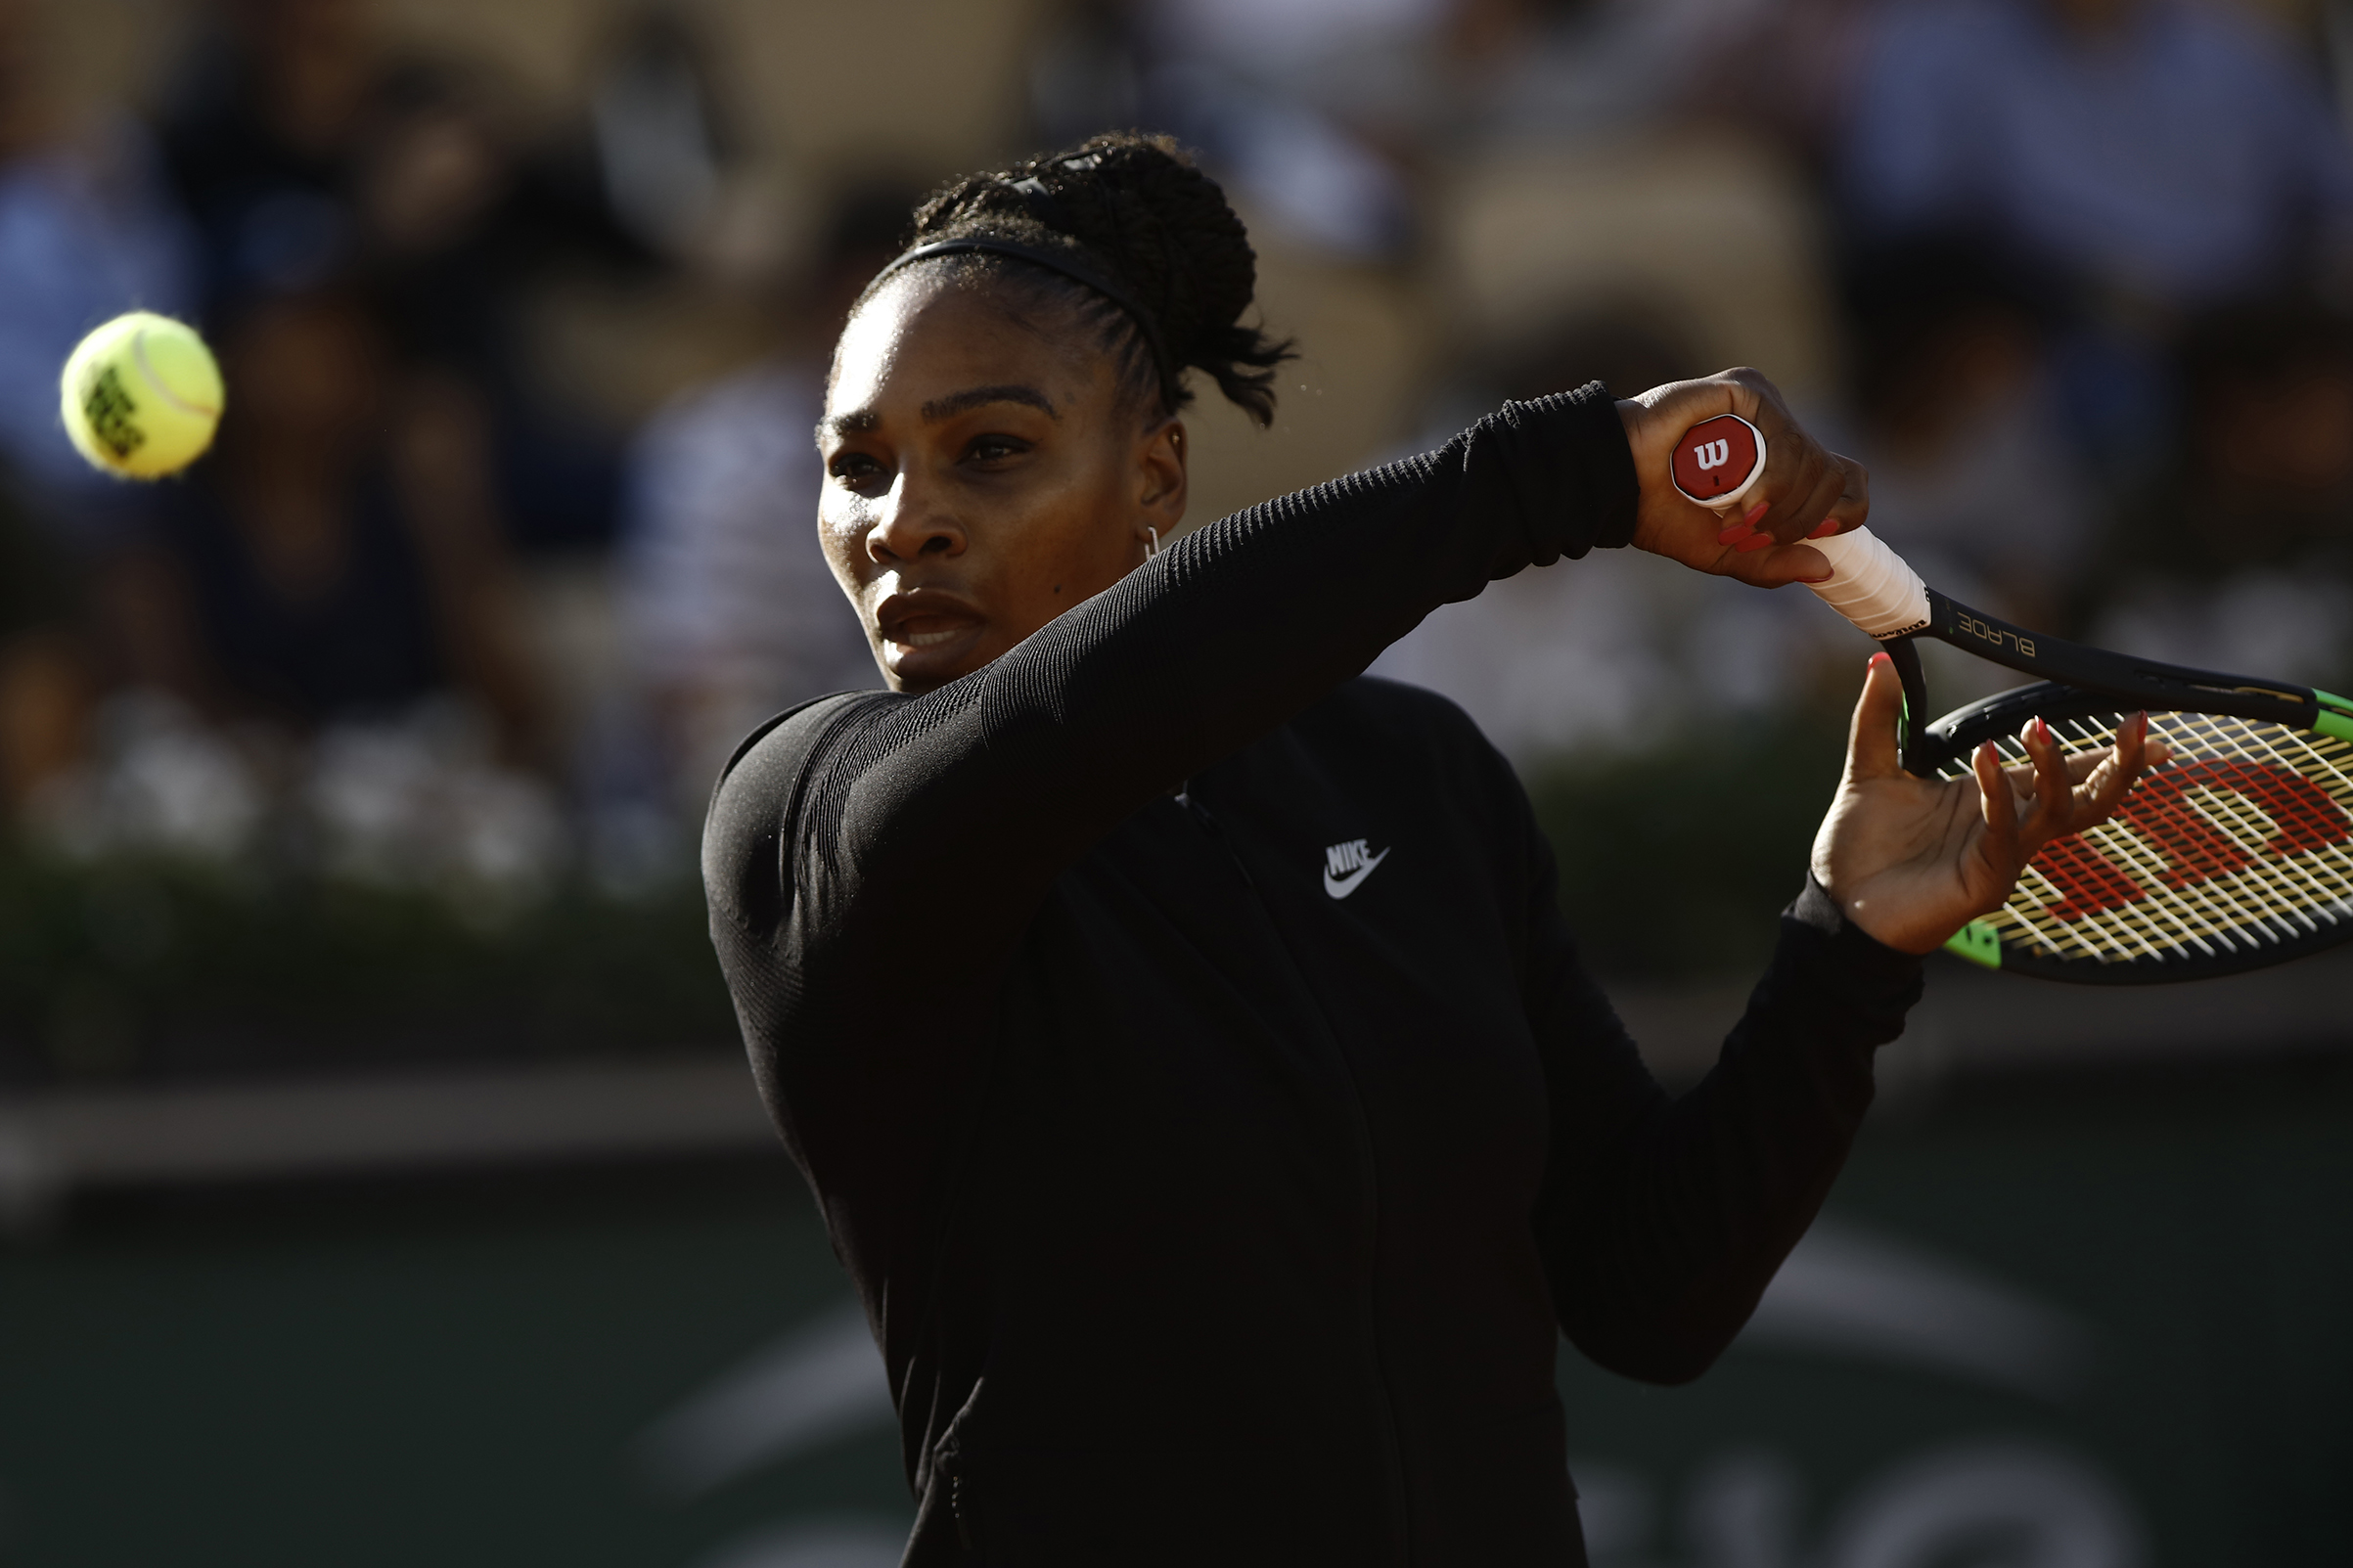 Serena Williams attends the tennis match game during the Roland Garros Tournament in Paris, France, on June 2, 2018. (Mehdi Taamallah—NurPhoto/Getty Images)